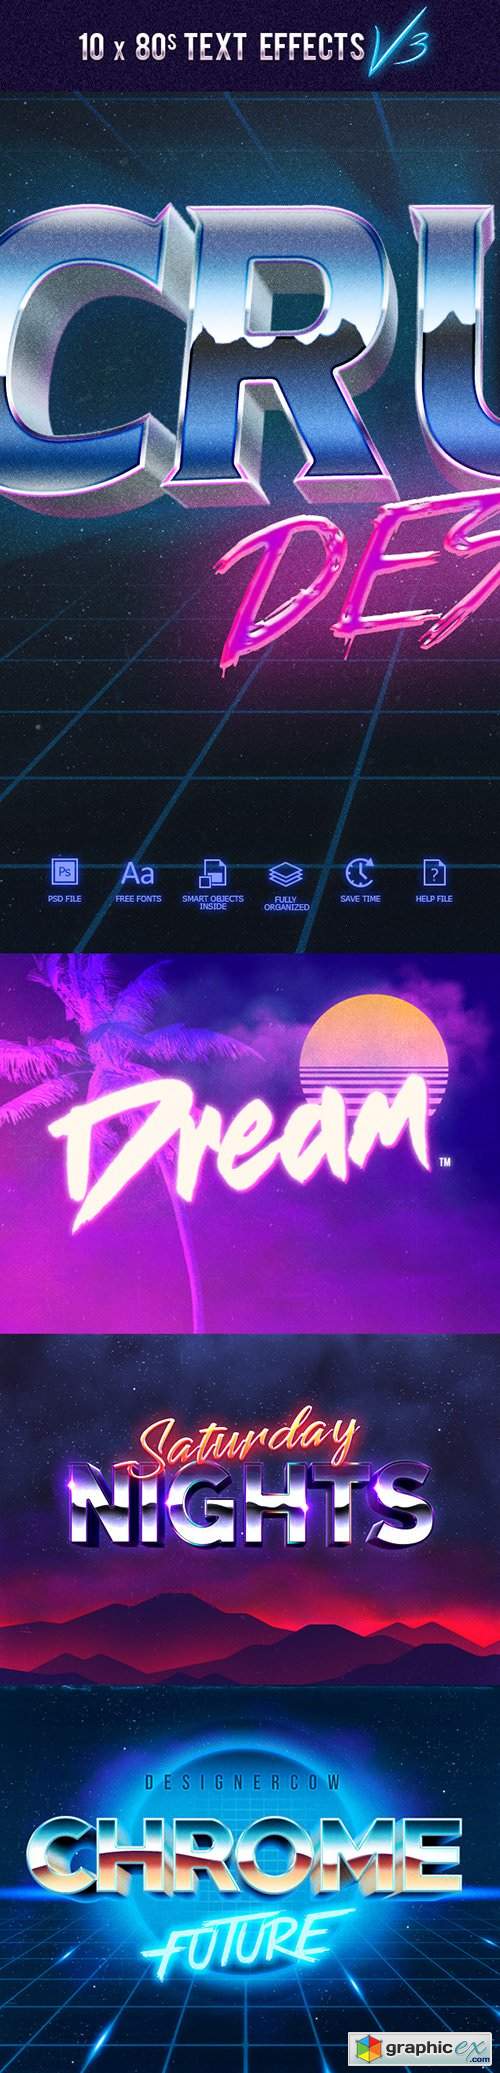 80s Text Effects V3